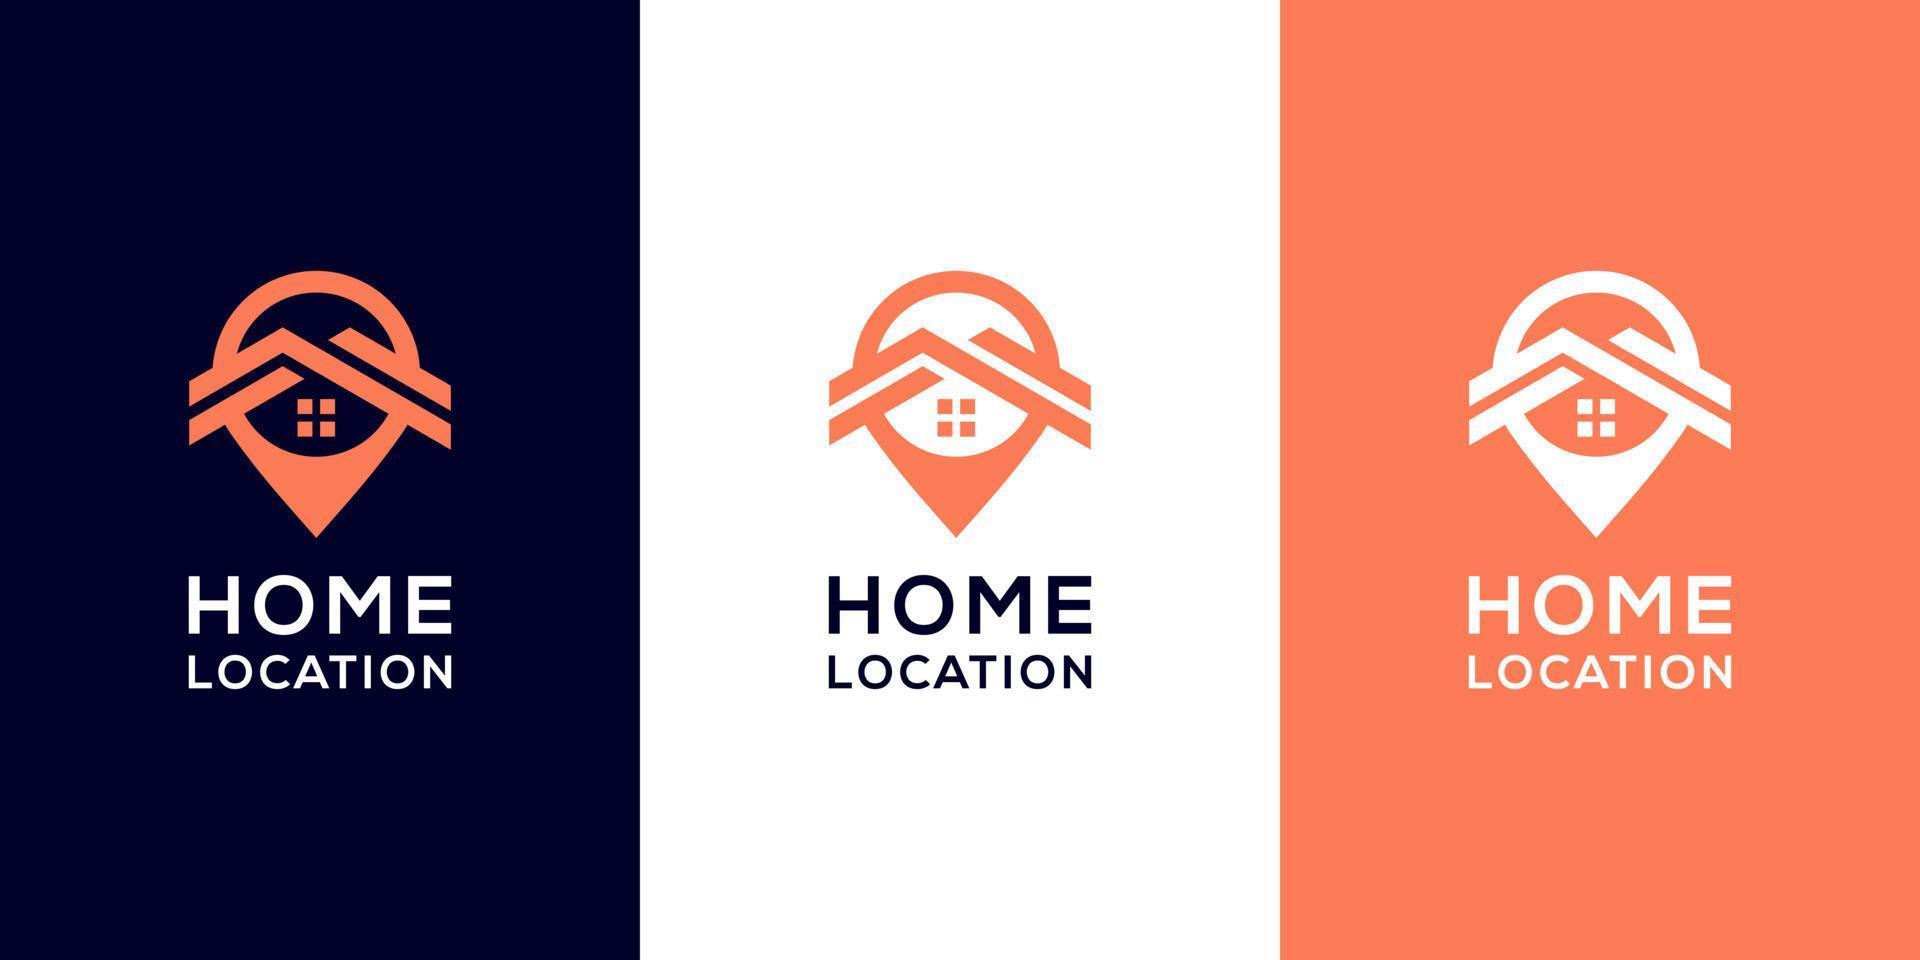 Home location logo templates and business card design vector